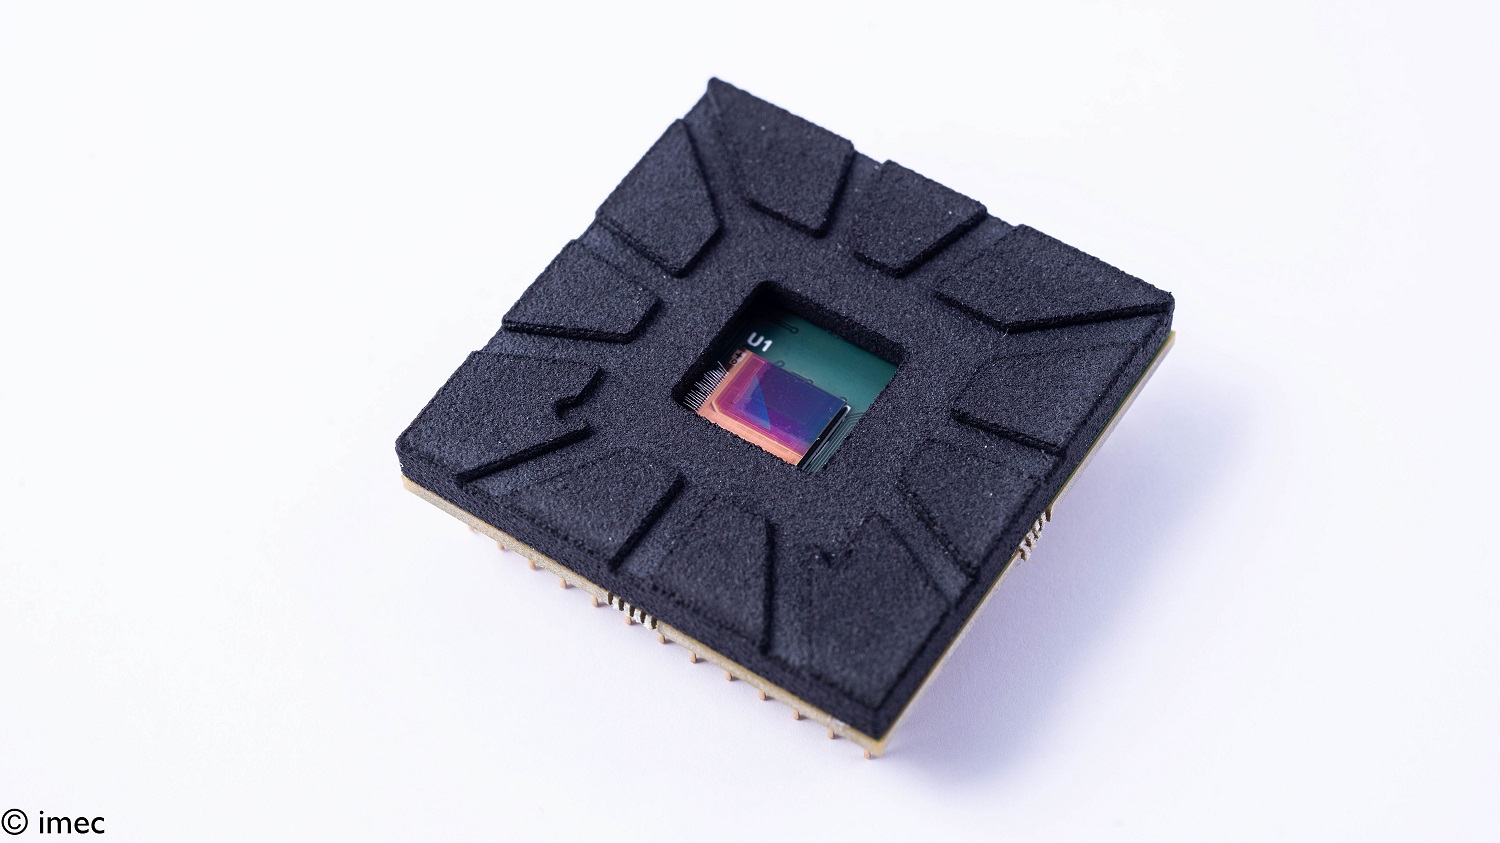 Imec’s thin-film SWIR image sensors can be integrated in camera modules with standard or SWIR lenses